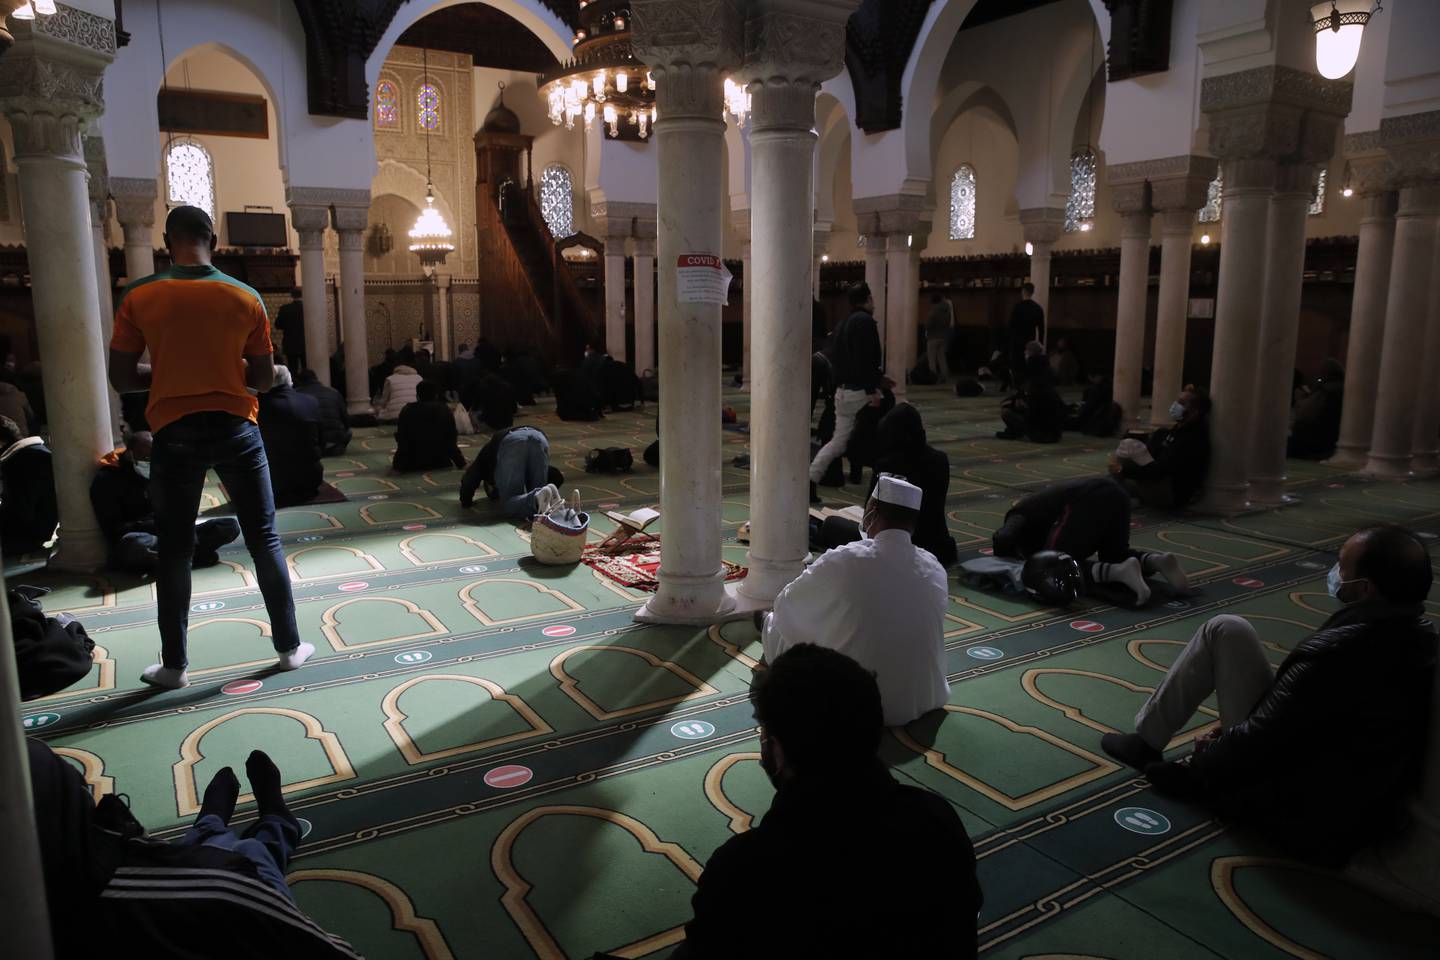 Muslims pray during the first day of Ramadan at the Paris Mosque last April. AP Photo